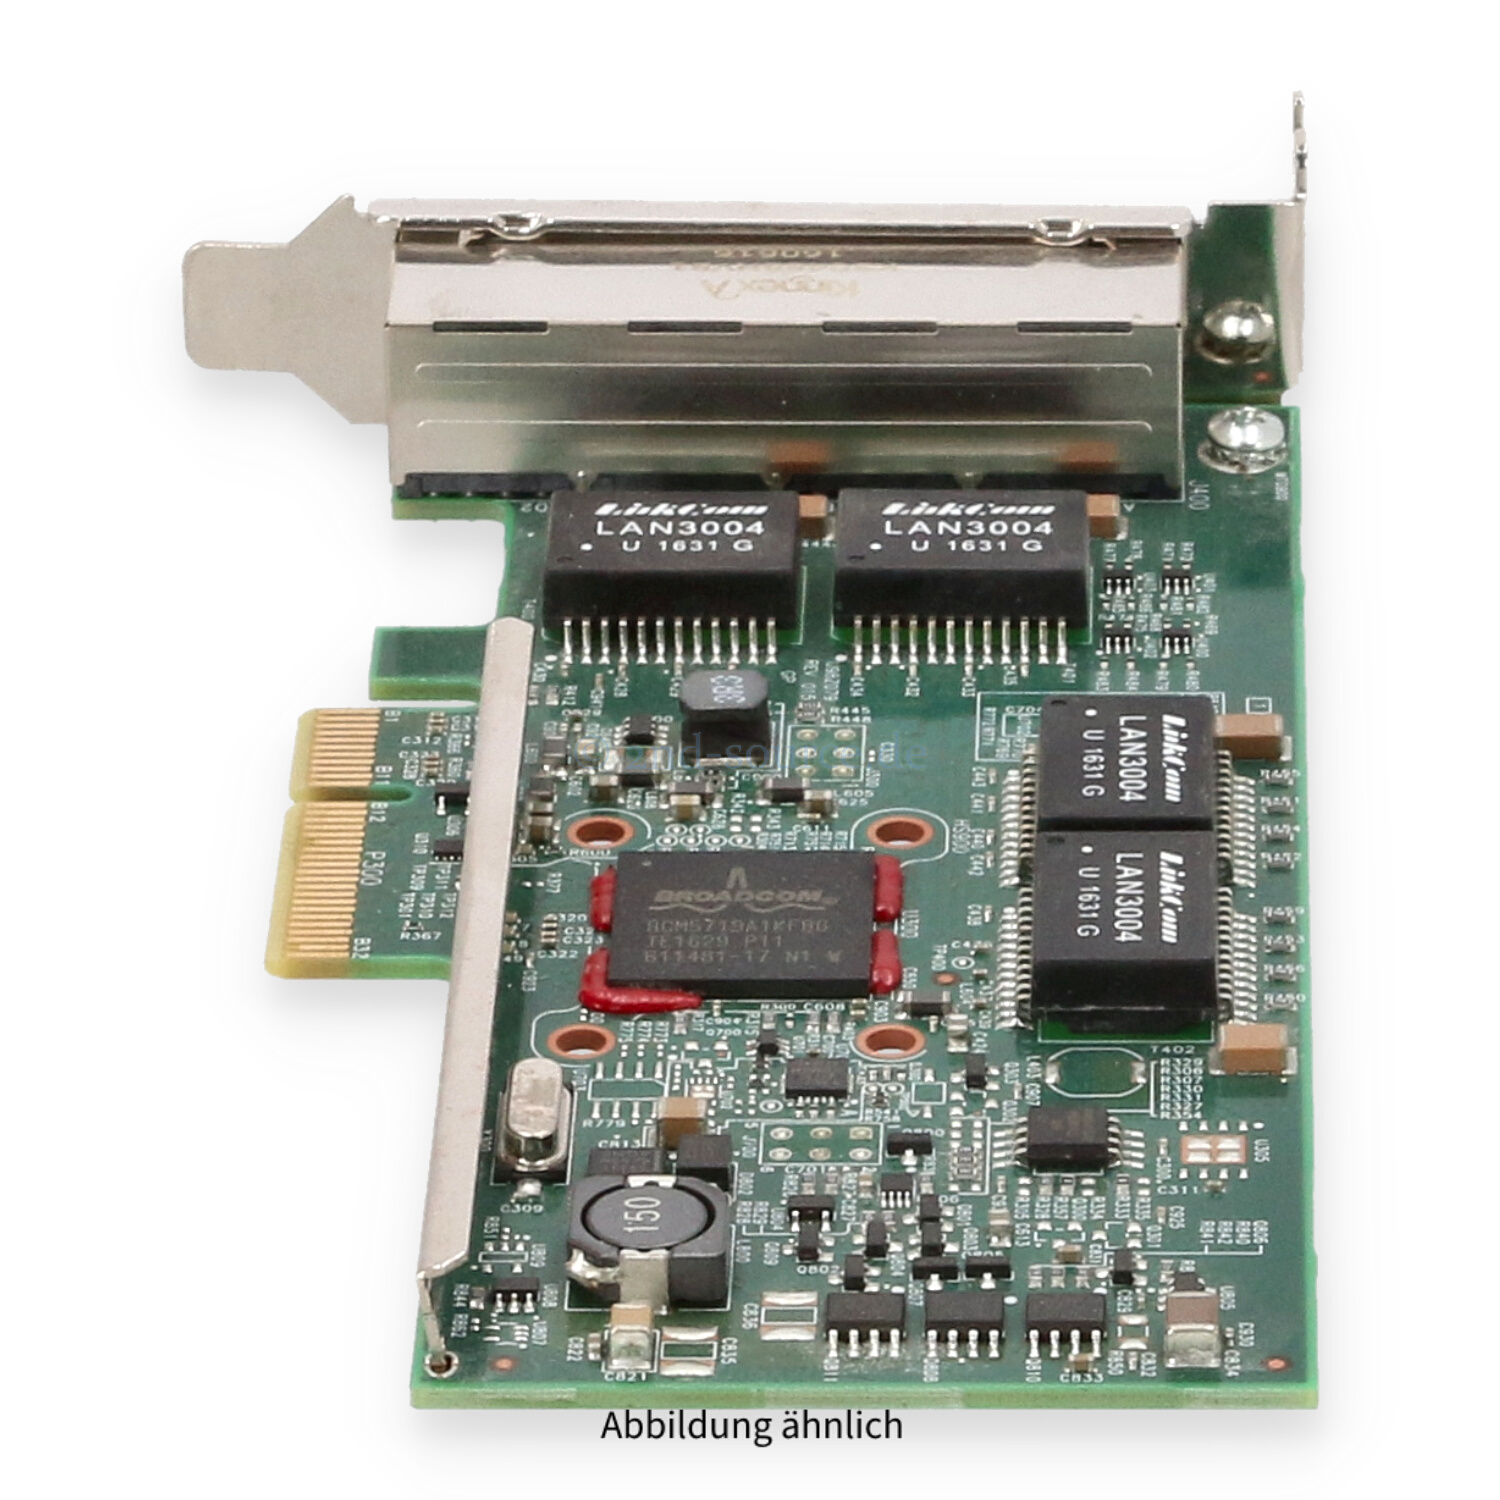 Dell Broadcom 5719 4x 1000Base-T PCIe Server Ethernet Adapter Low Profile YGCV4 0YGCV4